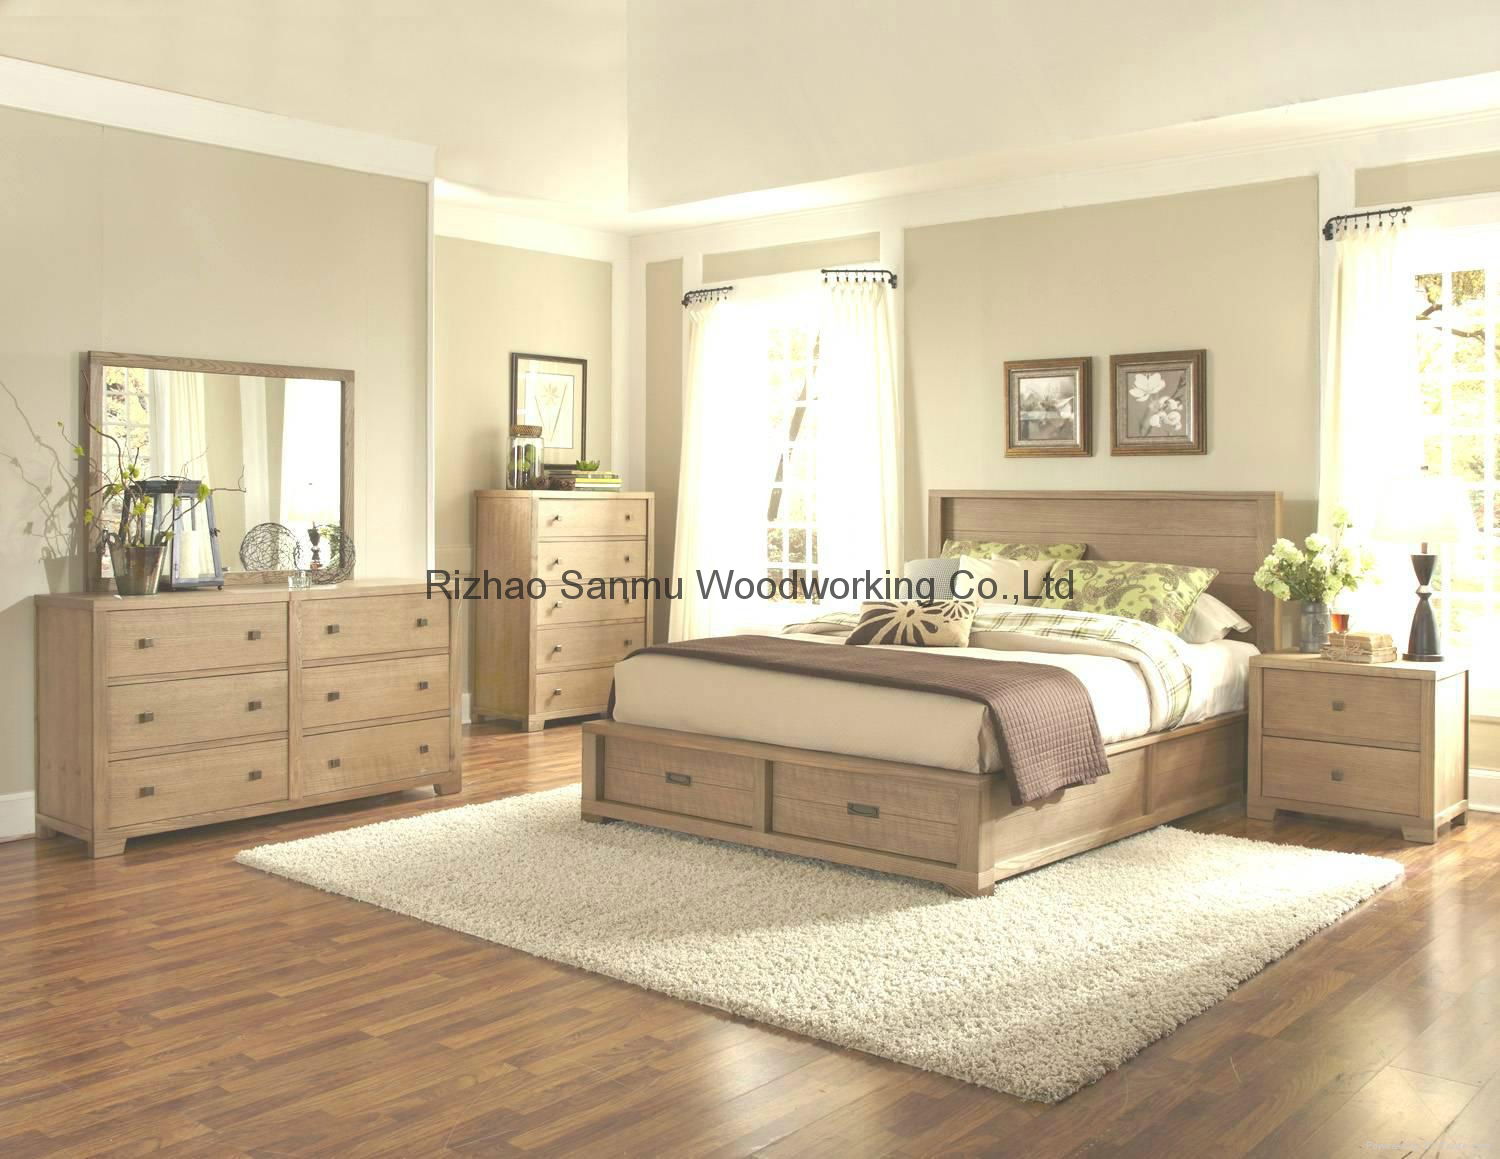 Solid Wooden Modern Bedroom Furniture Sm B199 92 Sanmu China Manufacturer Bedroom Furniture Furniture Products Diytrade China